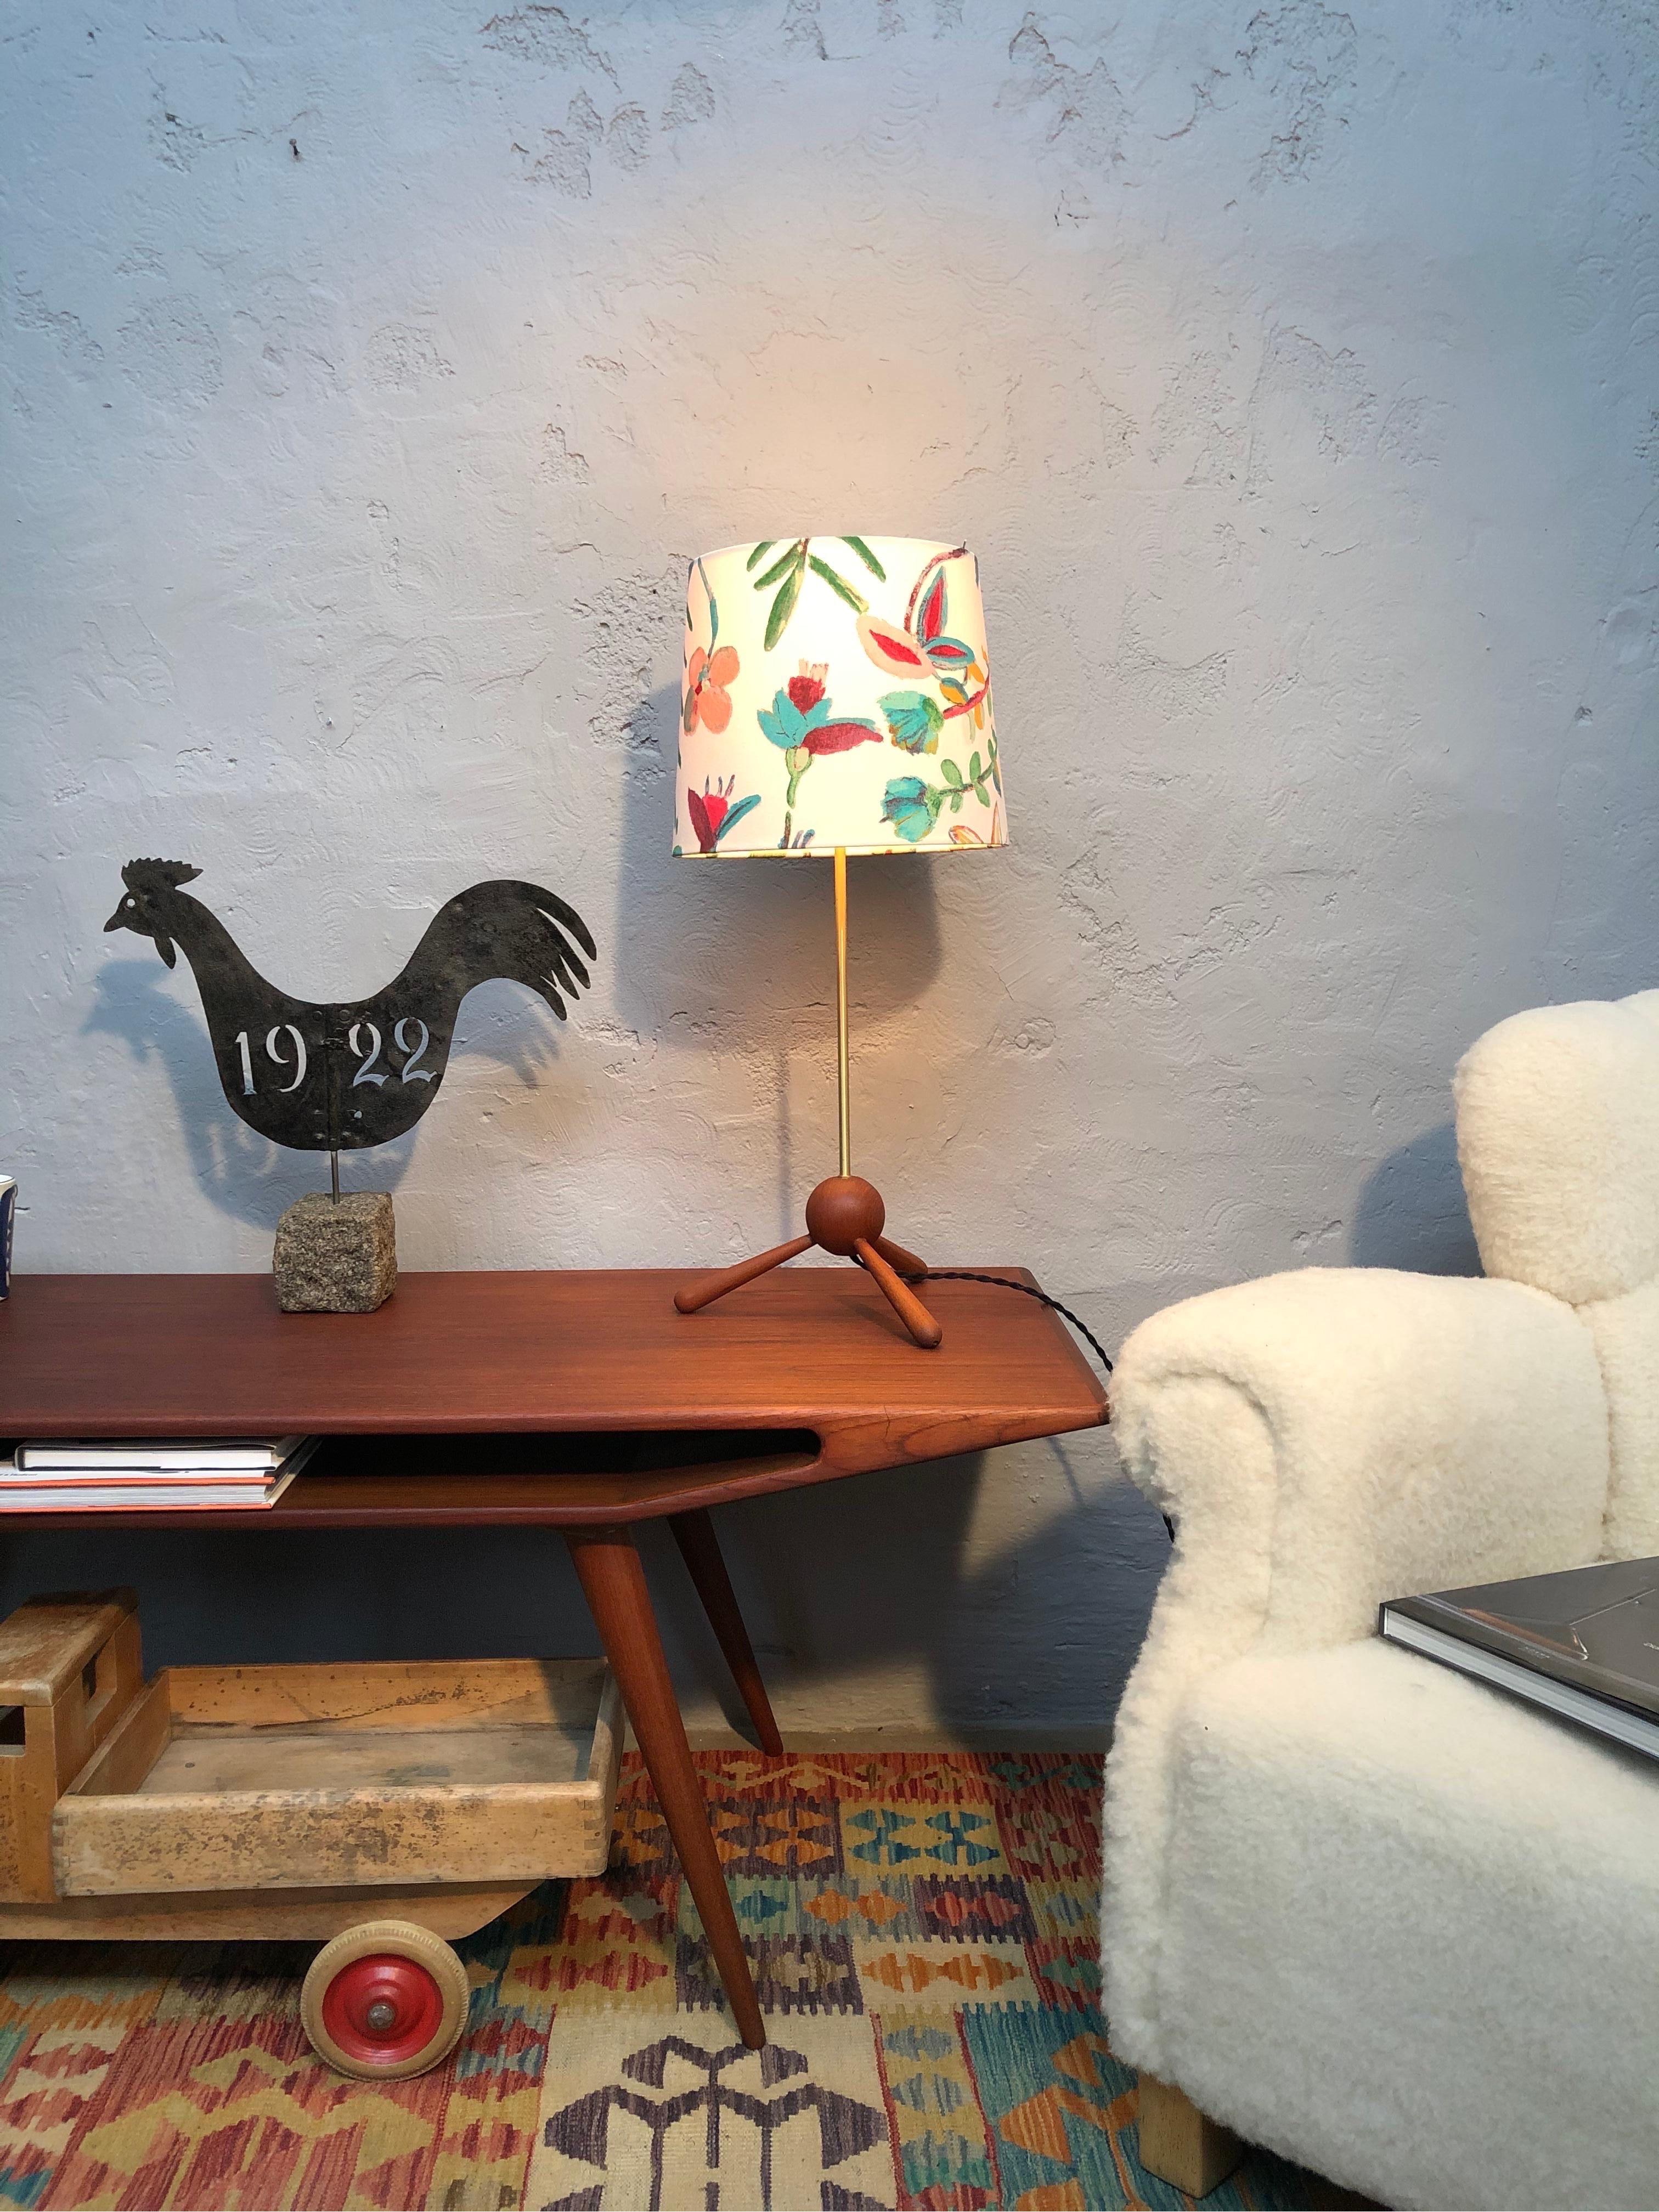 Vintage Danish Mid-Century Modern solid teak and brass table lamp with a very elegant period design. 
3 legged base in turned teak and with a brass upright. 
Rewired with a twisted cloth flex. 
Original E27 lamp holder. 
Can be fitted with an EU UK